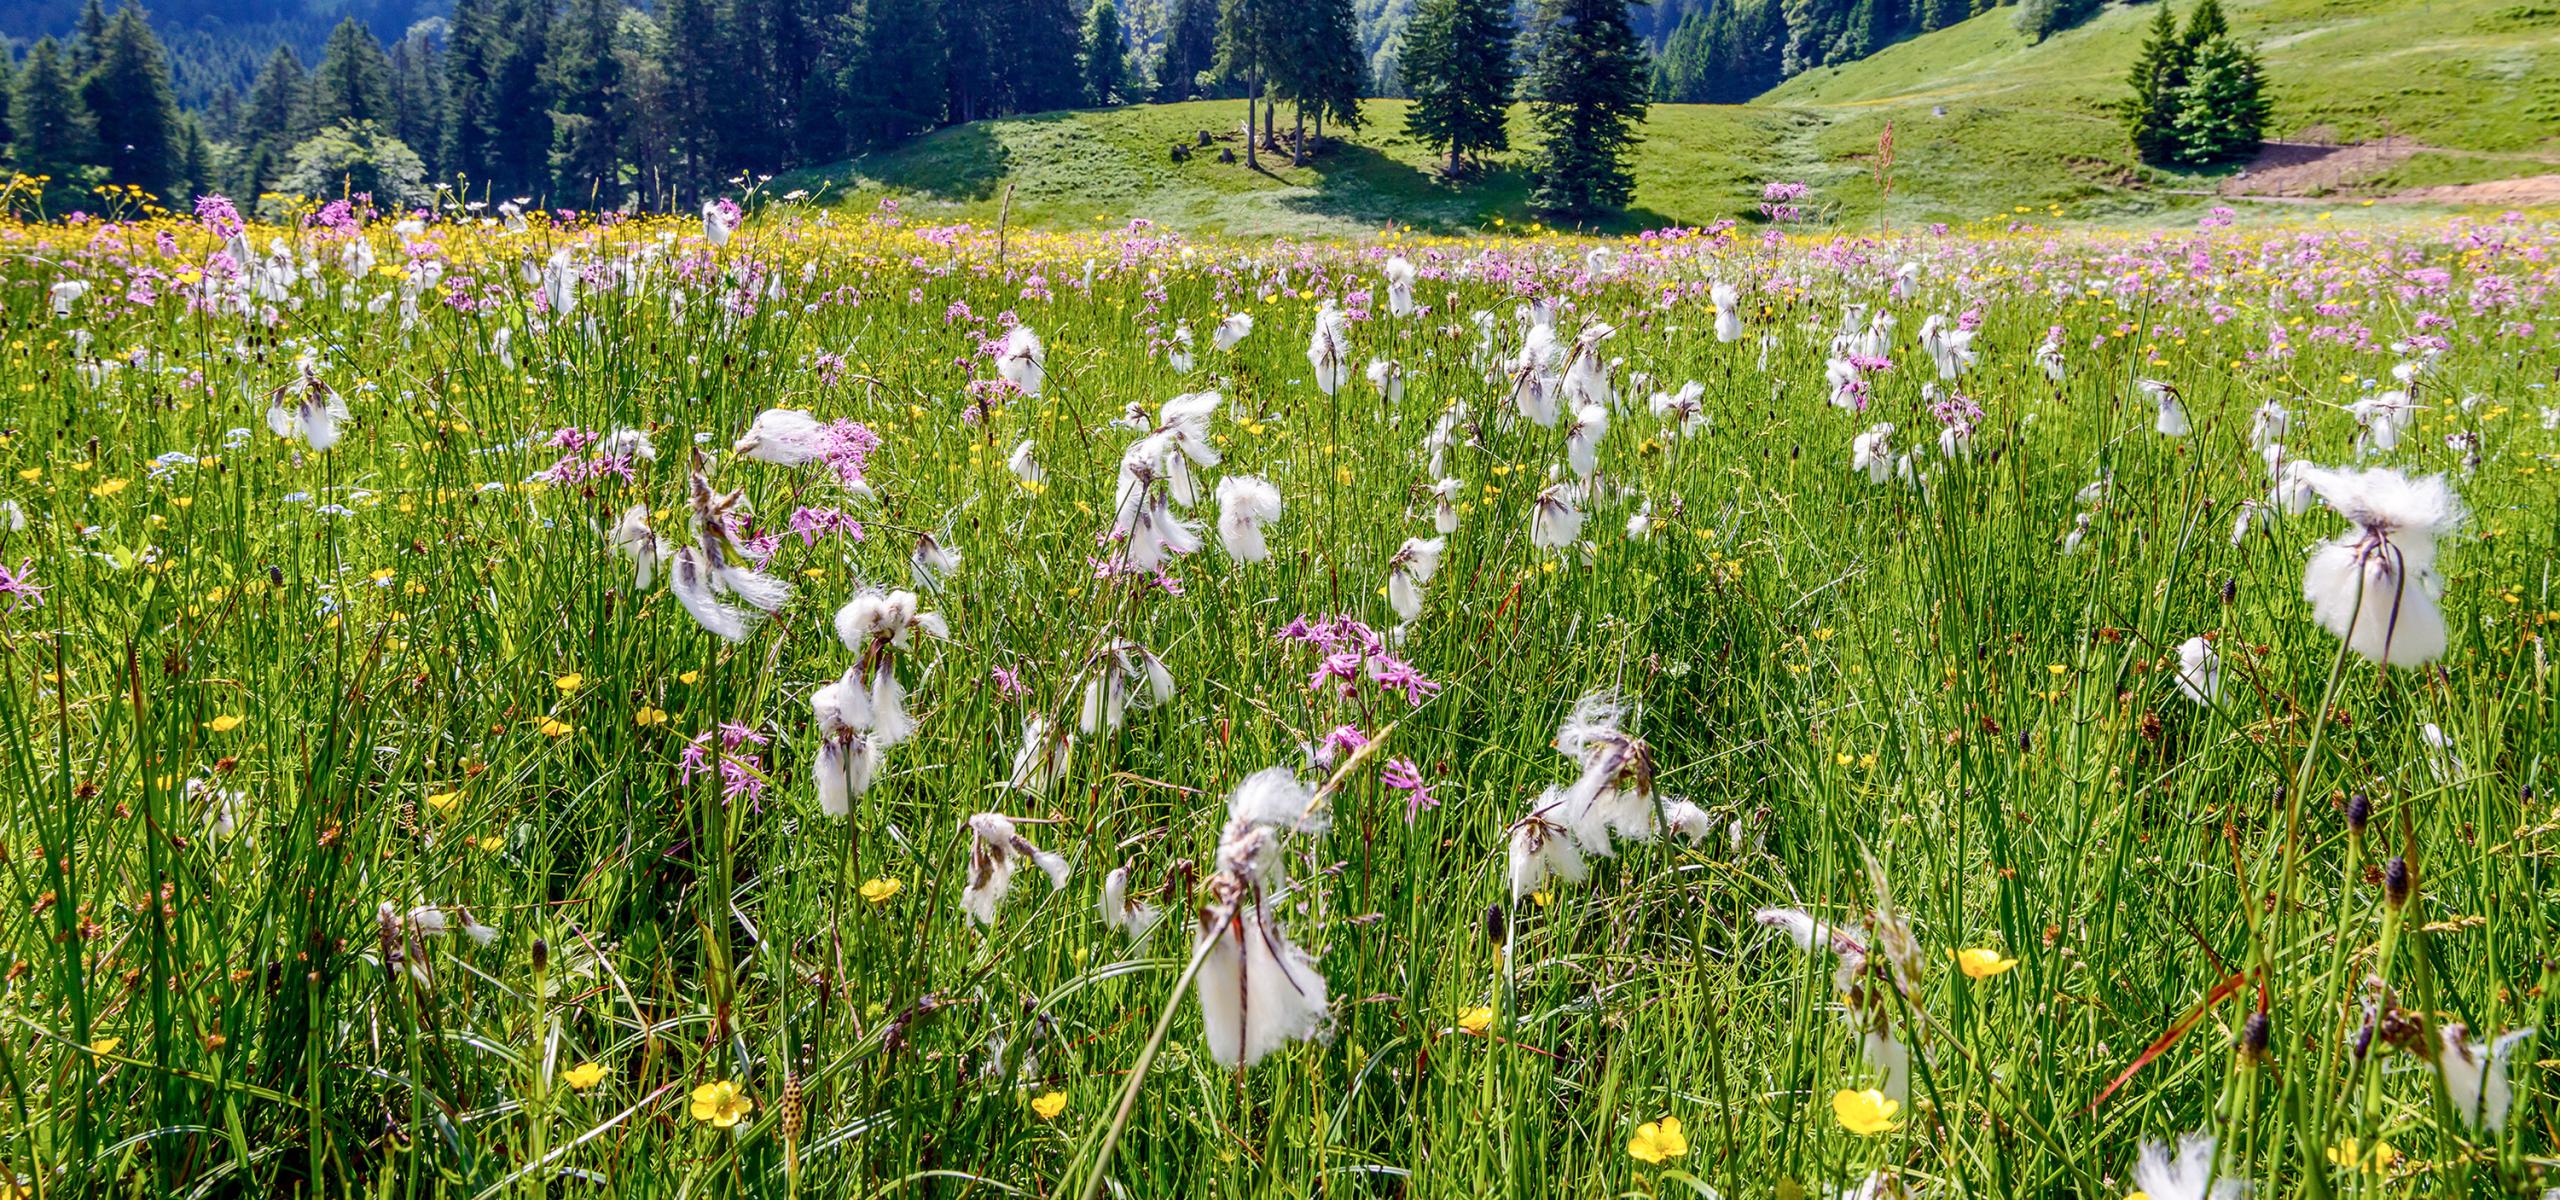 Flowering alpine meadow with cotton grass